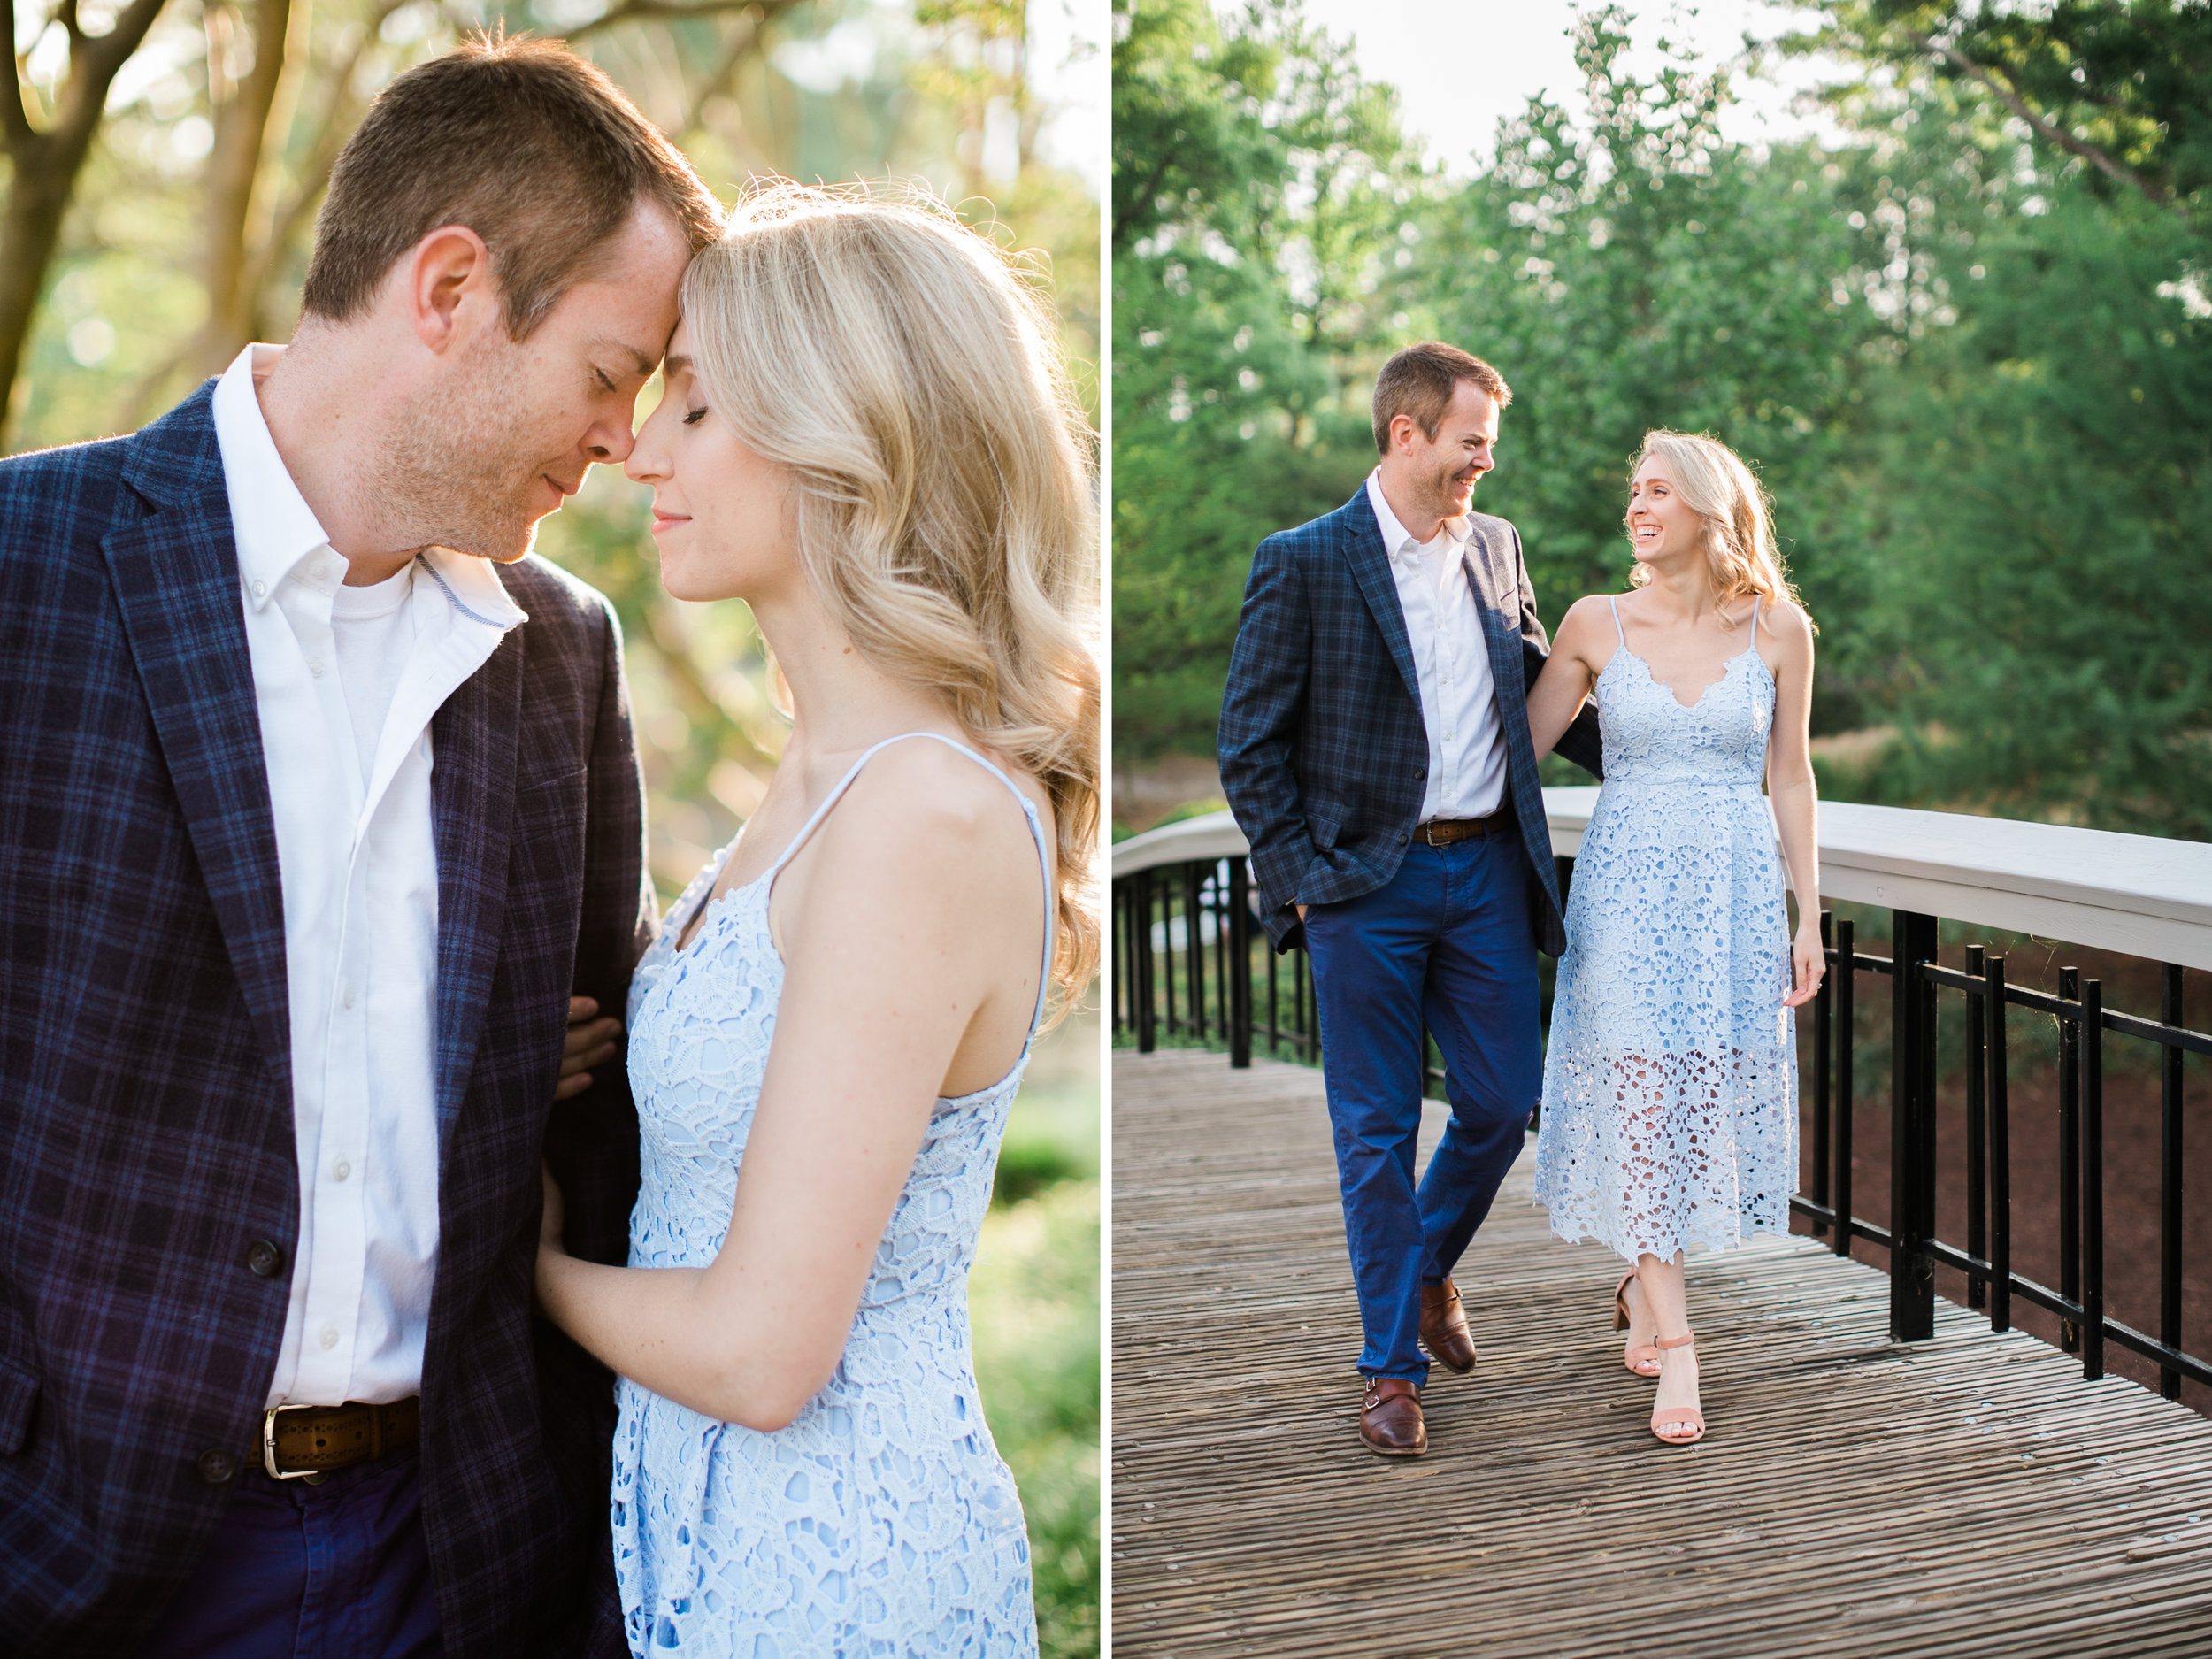 What to wear to an engagement photo shoot